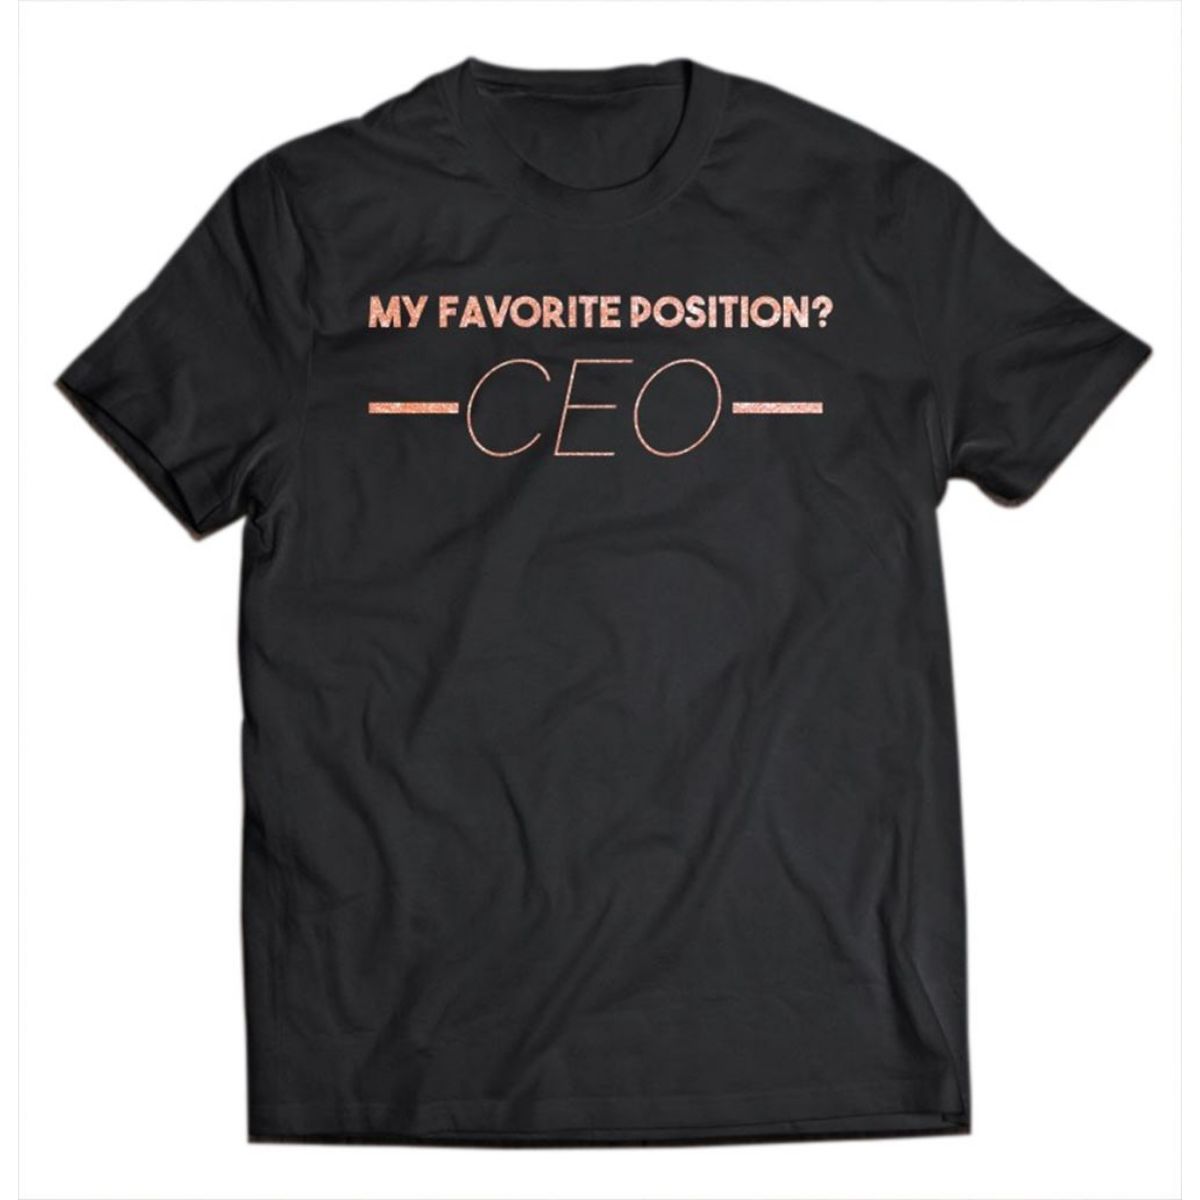 Ceo Is My Favorite Position T-Shirt